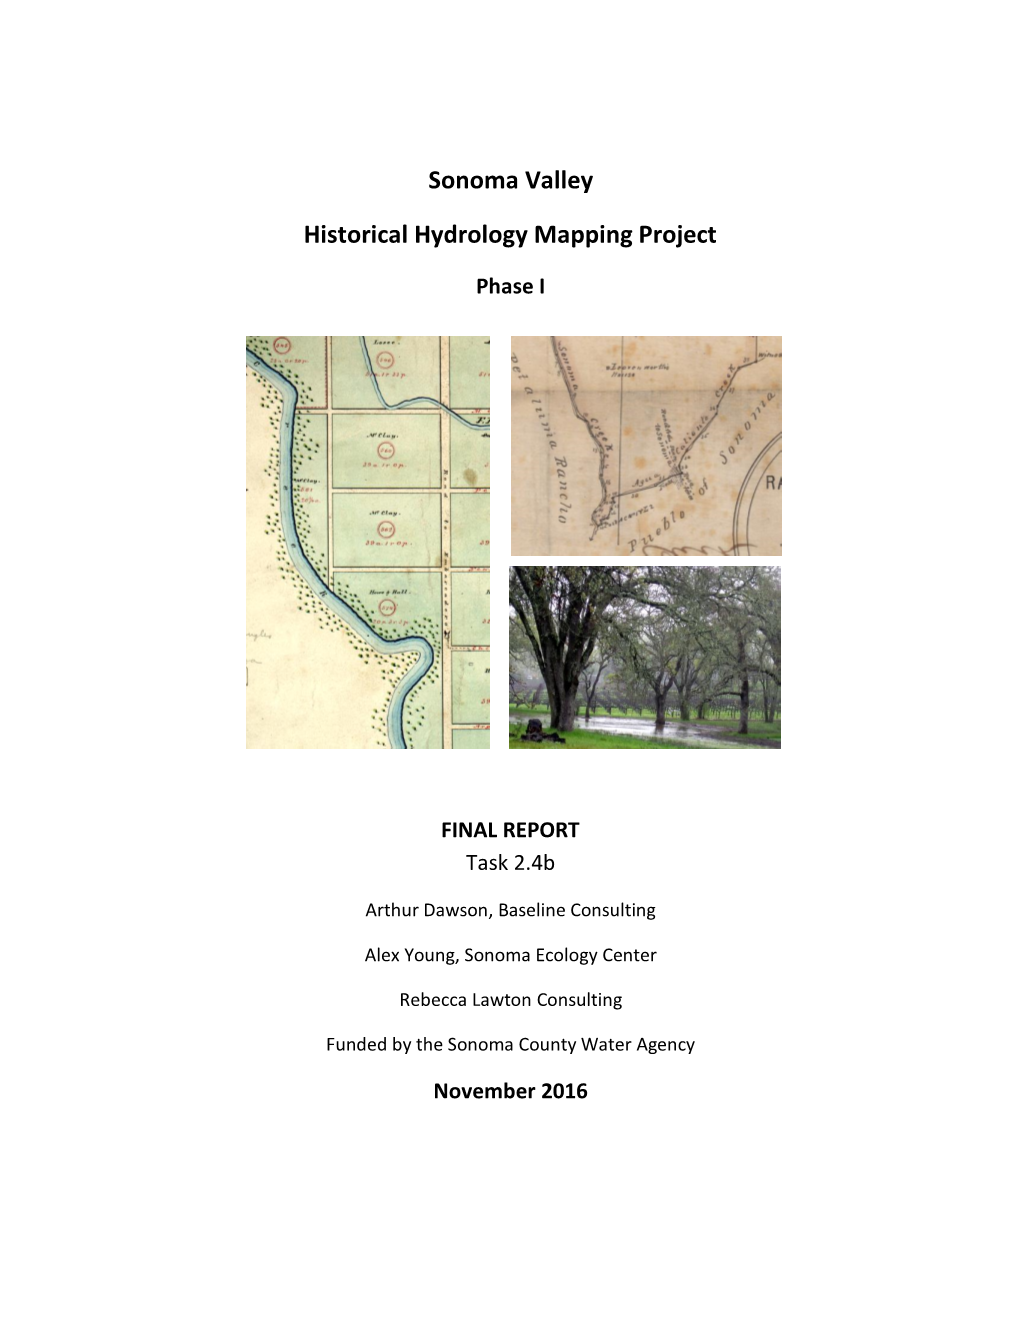 SONOMA VALLEY HISTORICAL HYDROLOGY MAPPING PROJECT, TASK 2.4.B: FINAL REPORT